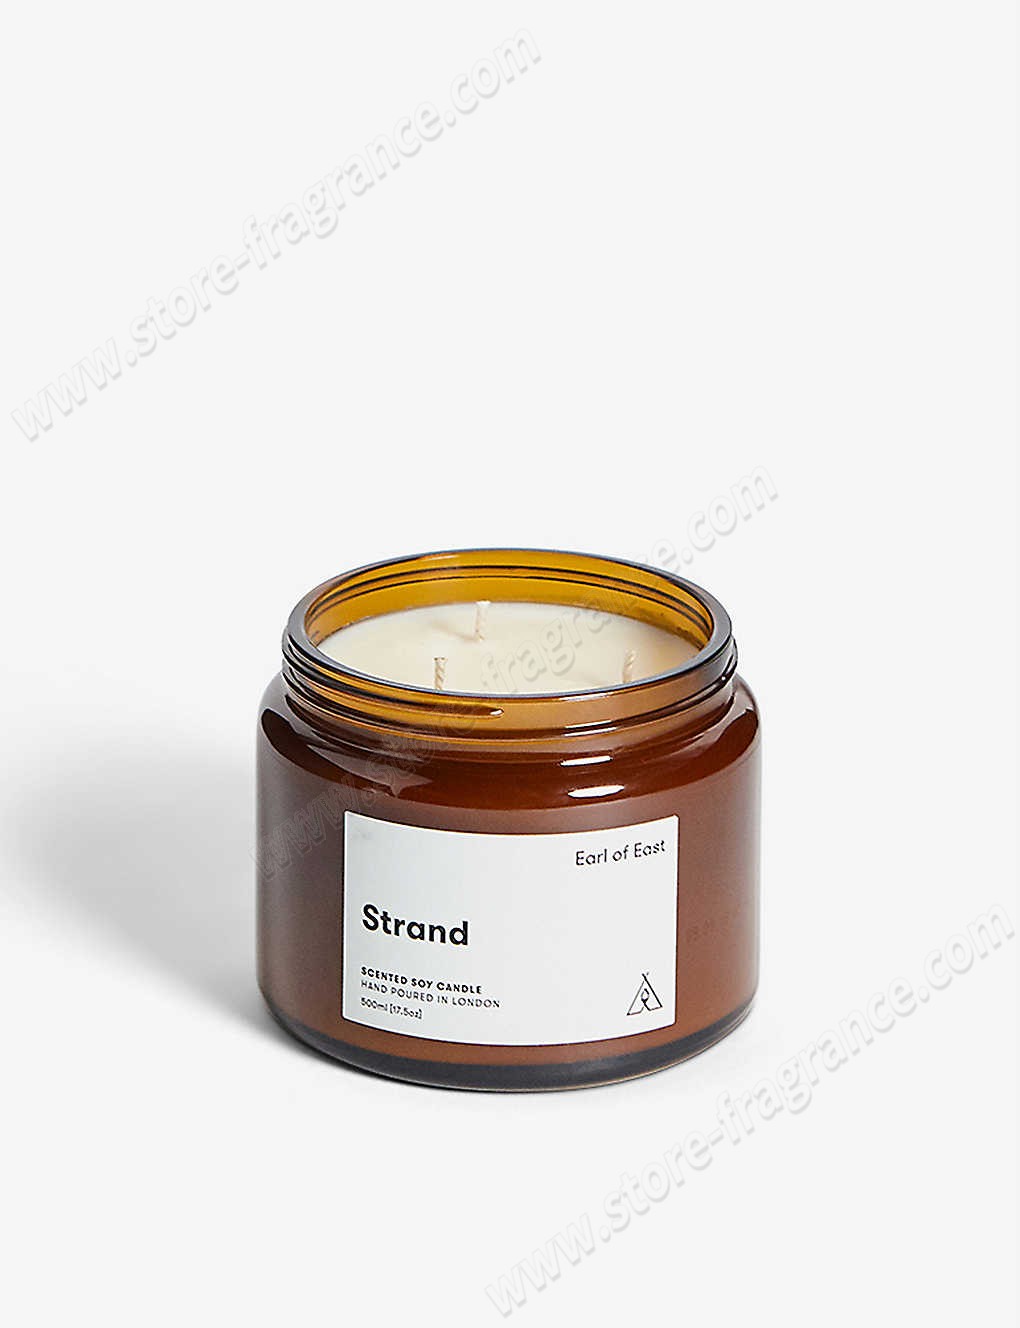 EARL OF EAST/Strand scented candle 500ml ✿ Discount Store - EARL OF EAST/Strand scented candle 500ml ✿ Discount Store